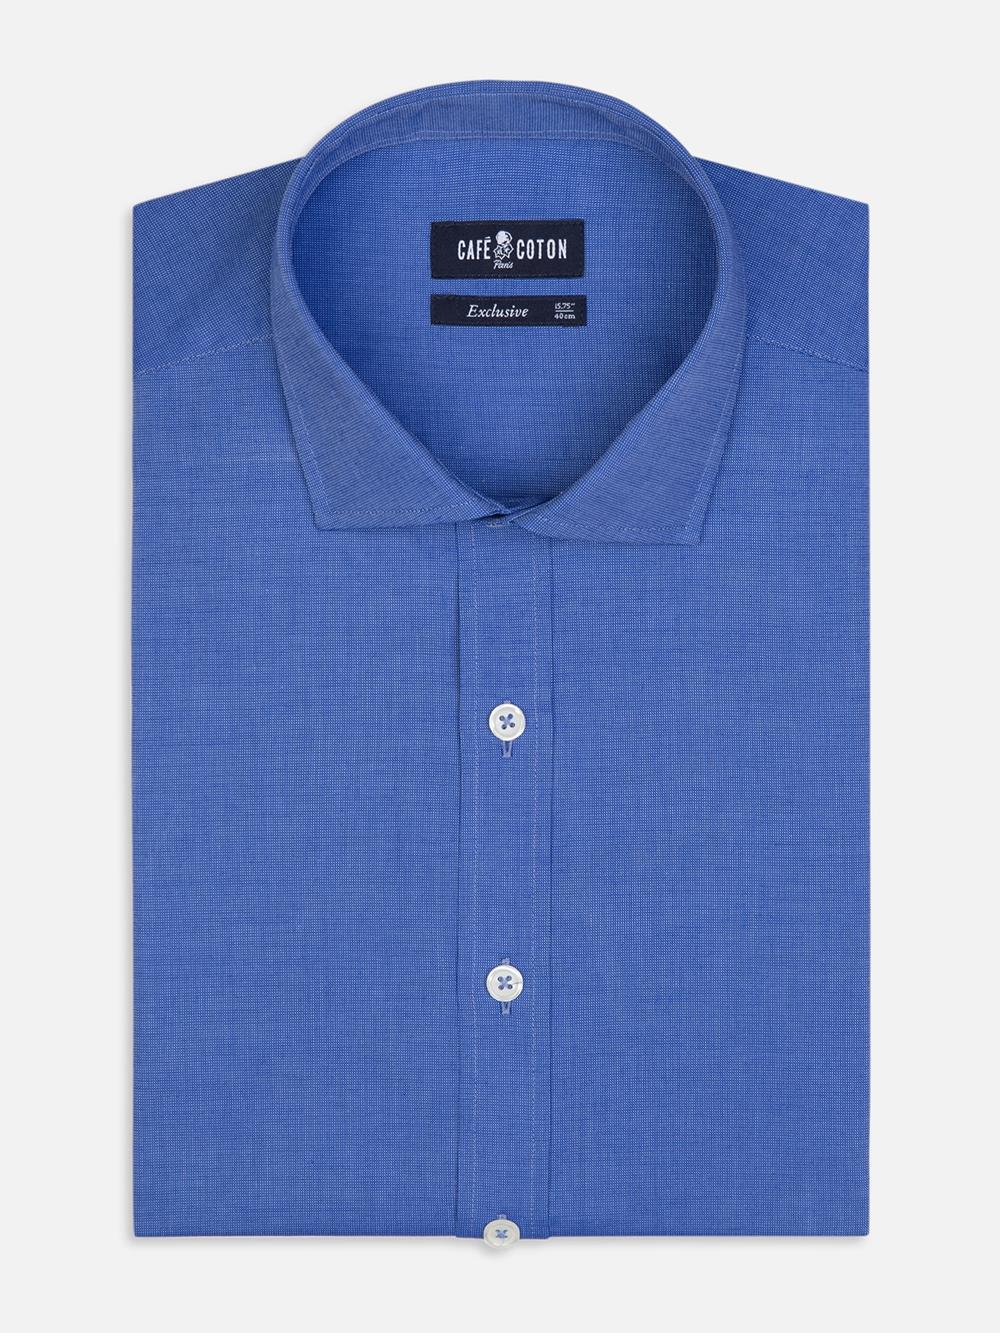 Bob slim-fitted overhemd in blauw micro-oxford